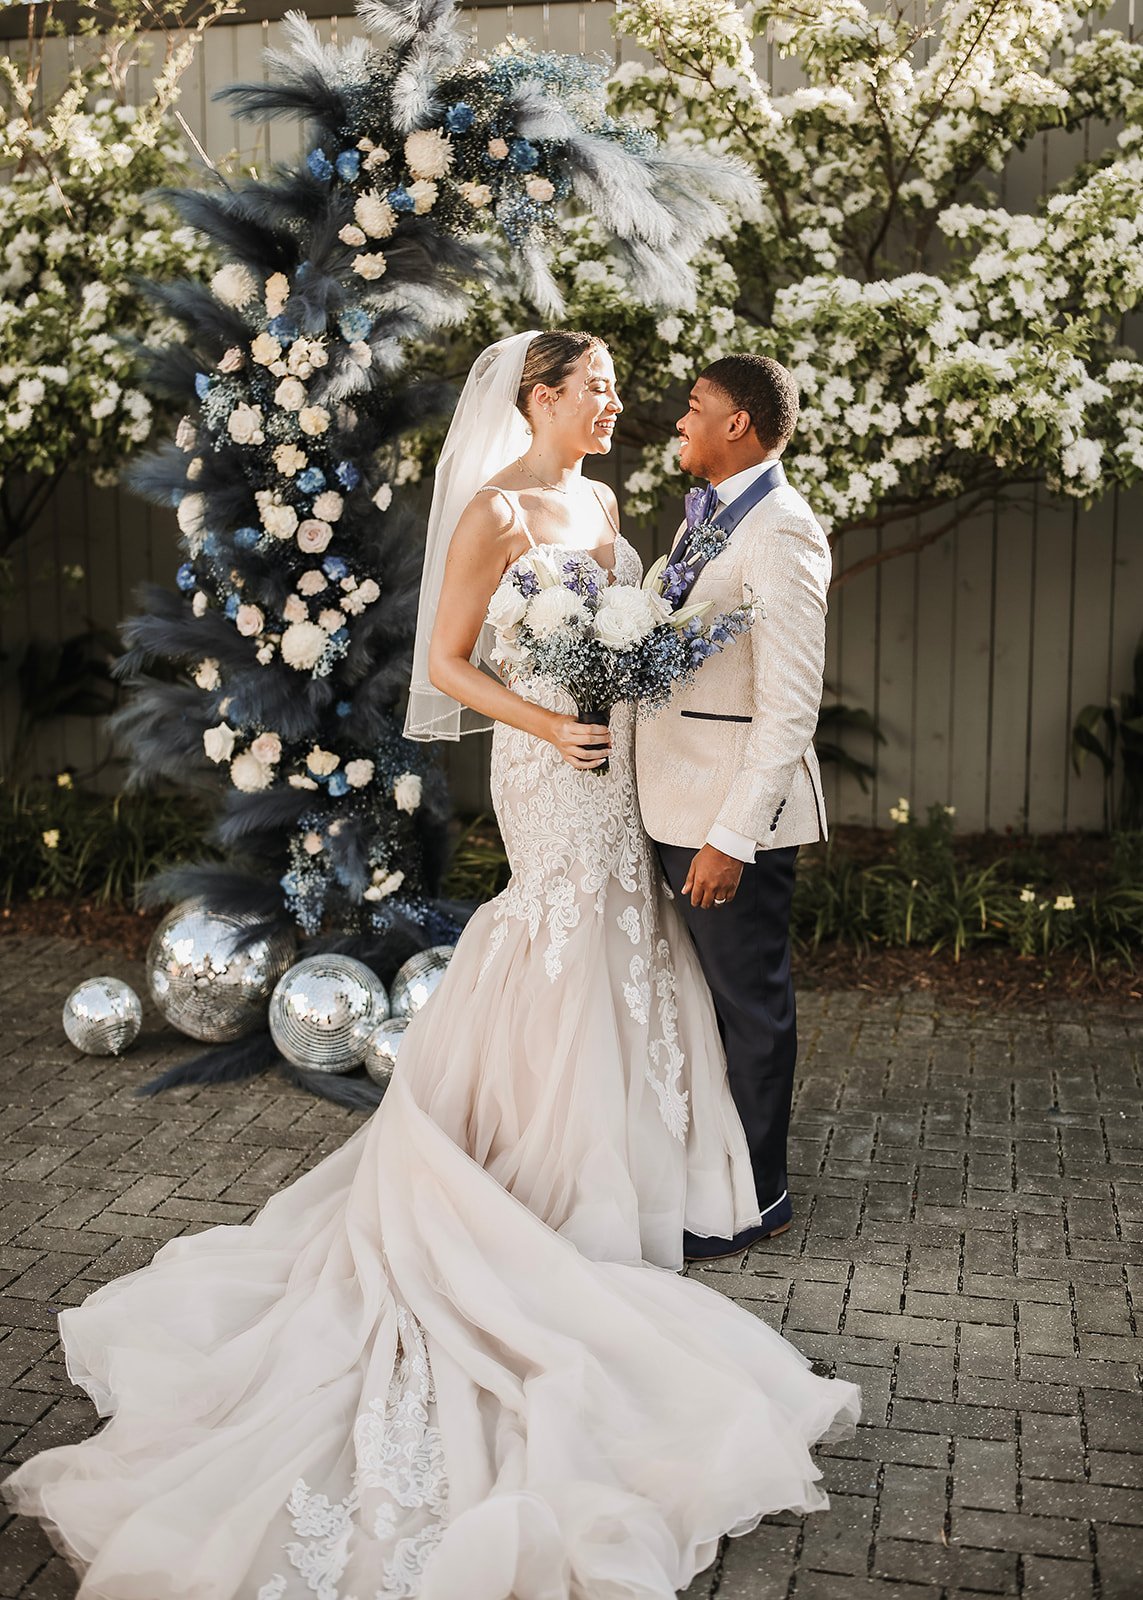 natalia-and-kelvins-starry-night-themed-wedding-at-victory-north-in-savannah-georgia-with-celestial-inspired-wedding-florals-designed-by-savannah-wedding-florist-ivory-and-beau-savannah-florist-savannah-wedding-11.jpg